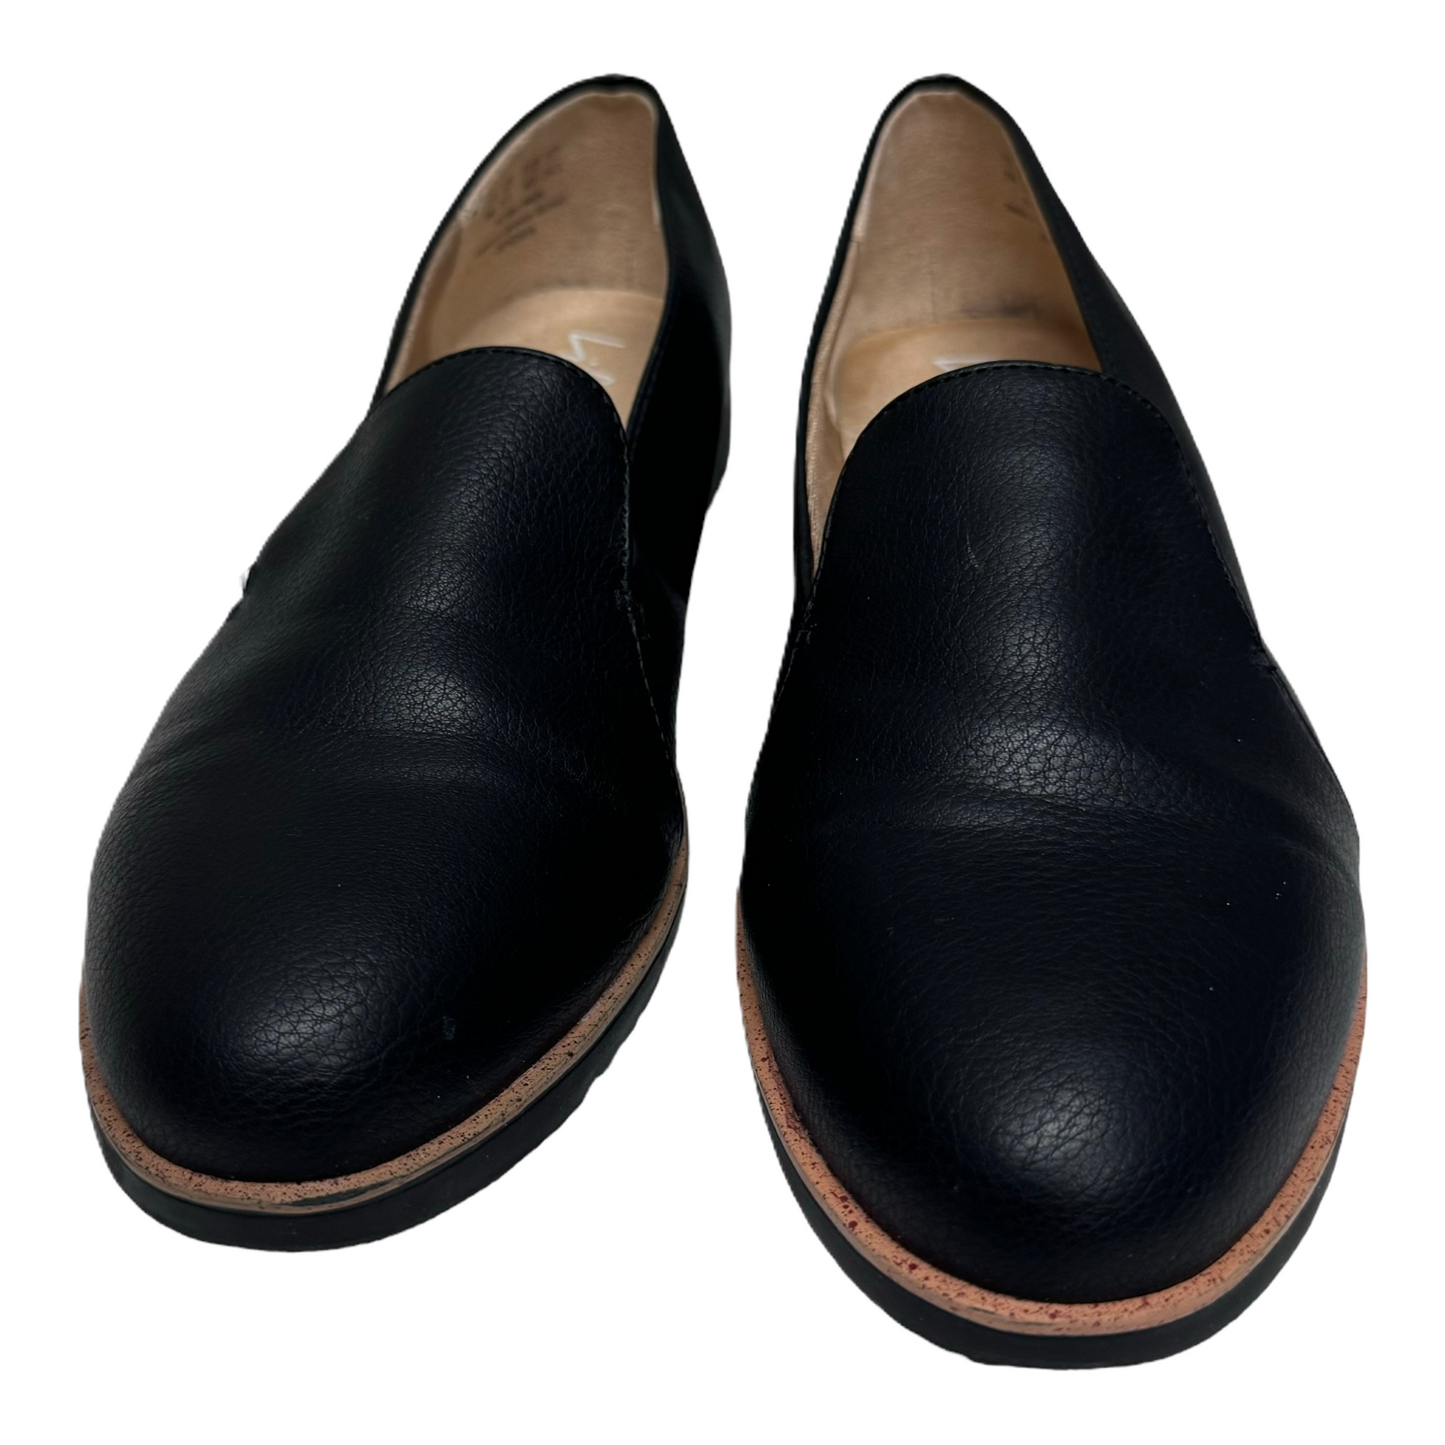 Black Shoes Flats By Life Stride, Size: 8